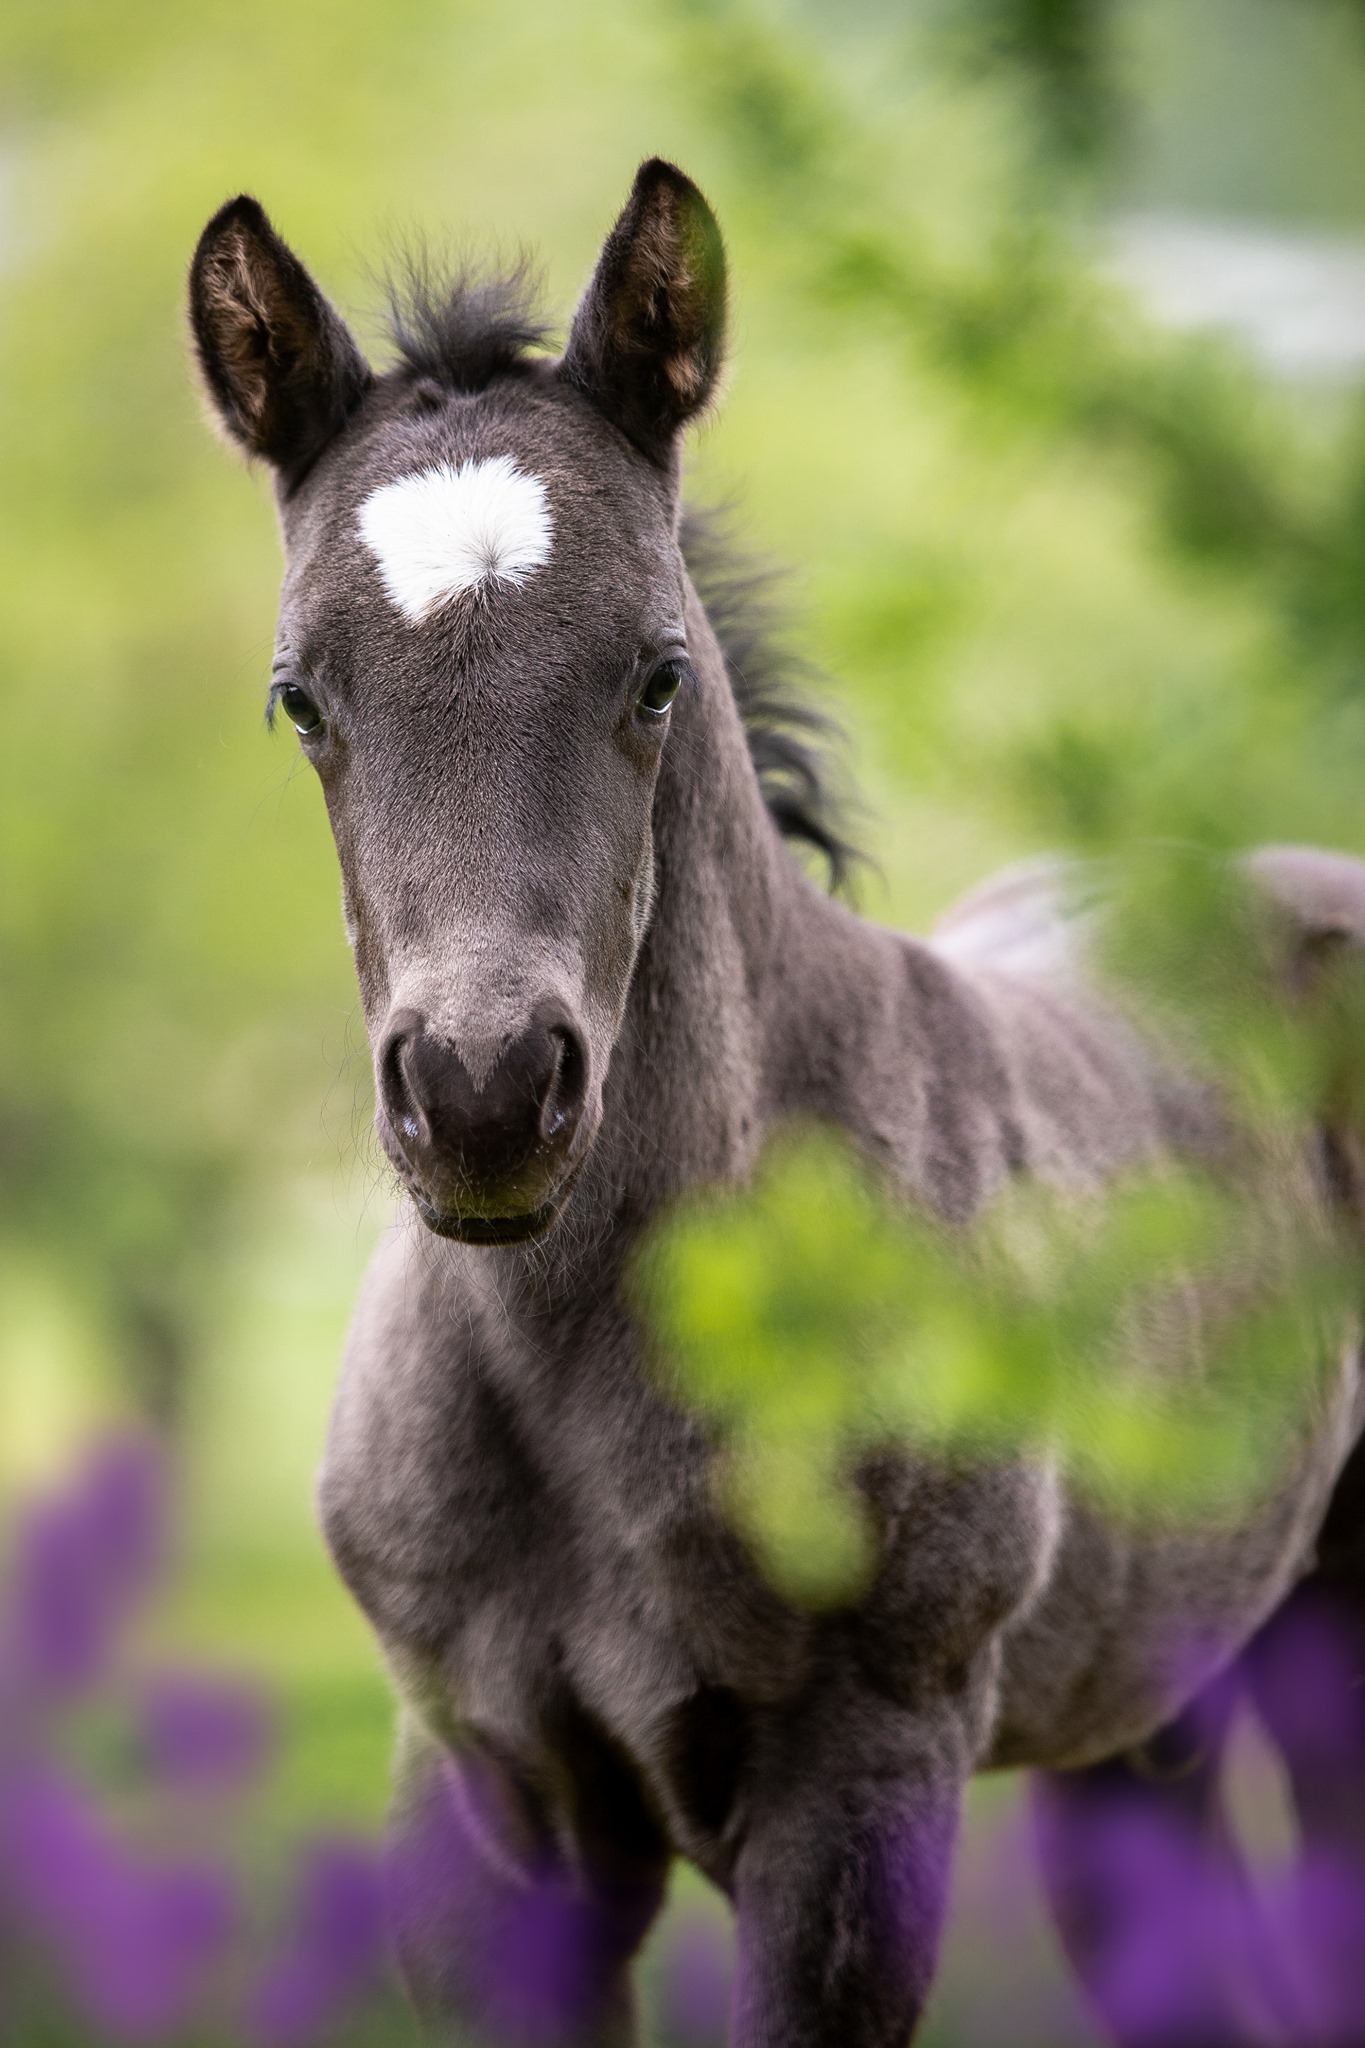 perfect for a foal shoot. It is blooming and greening around us, so the perfect conditions for a foal shoot.